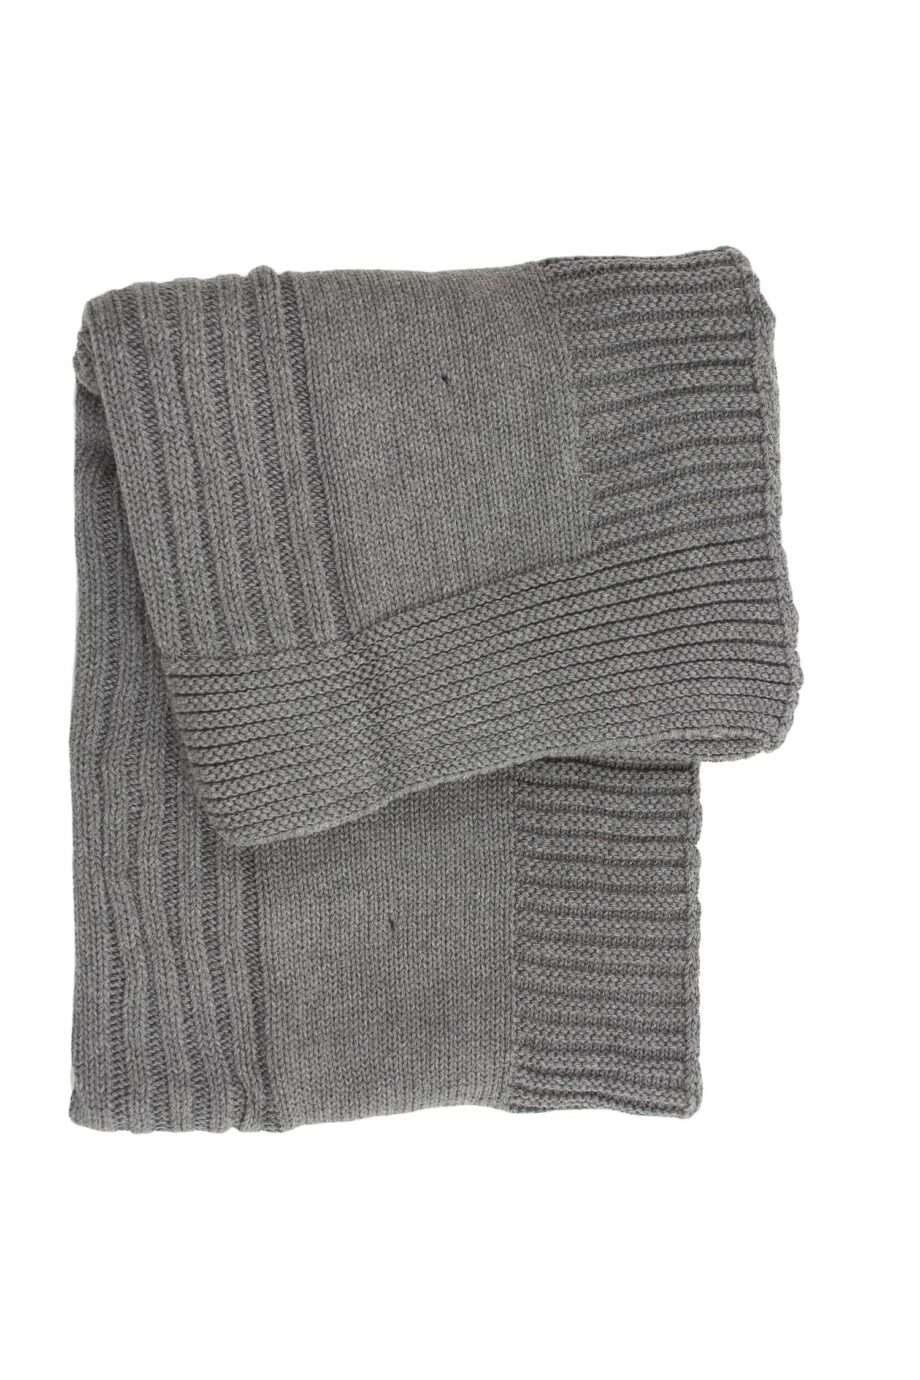 grey knitted cotton little blanket small